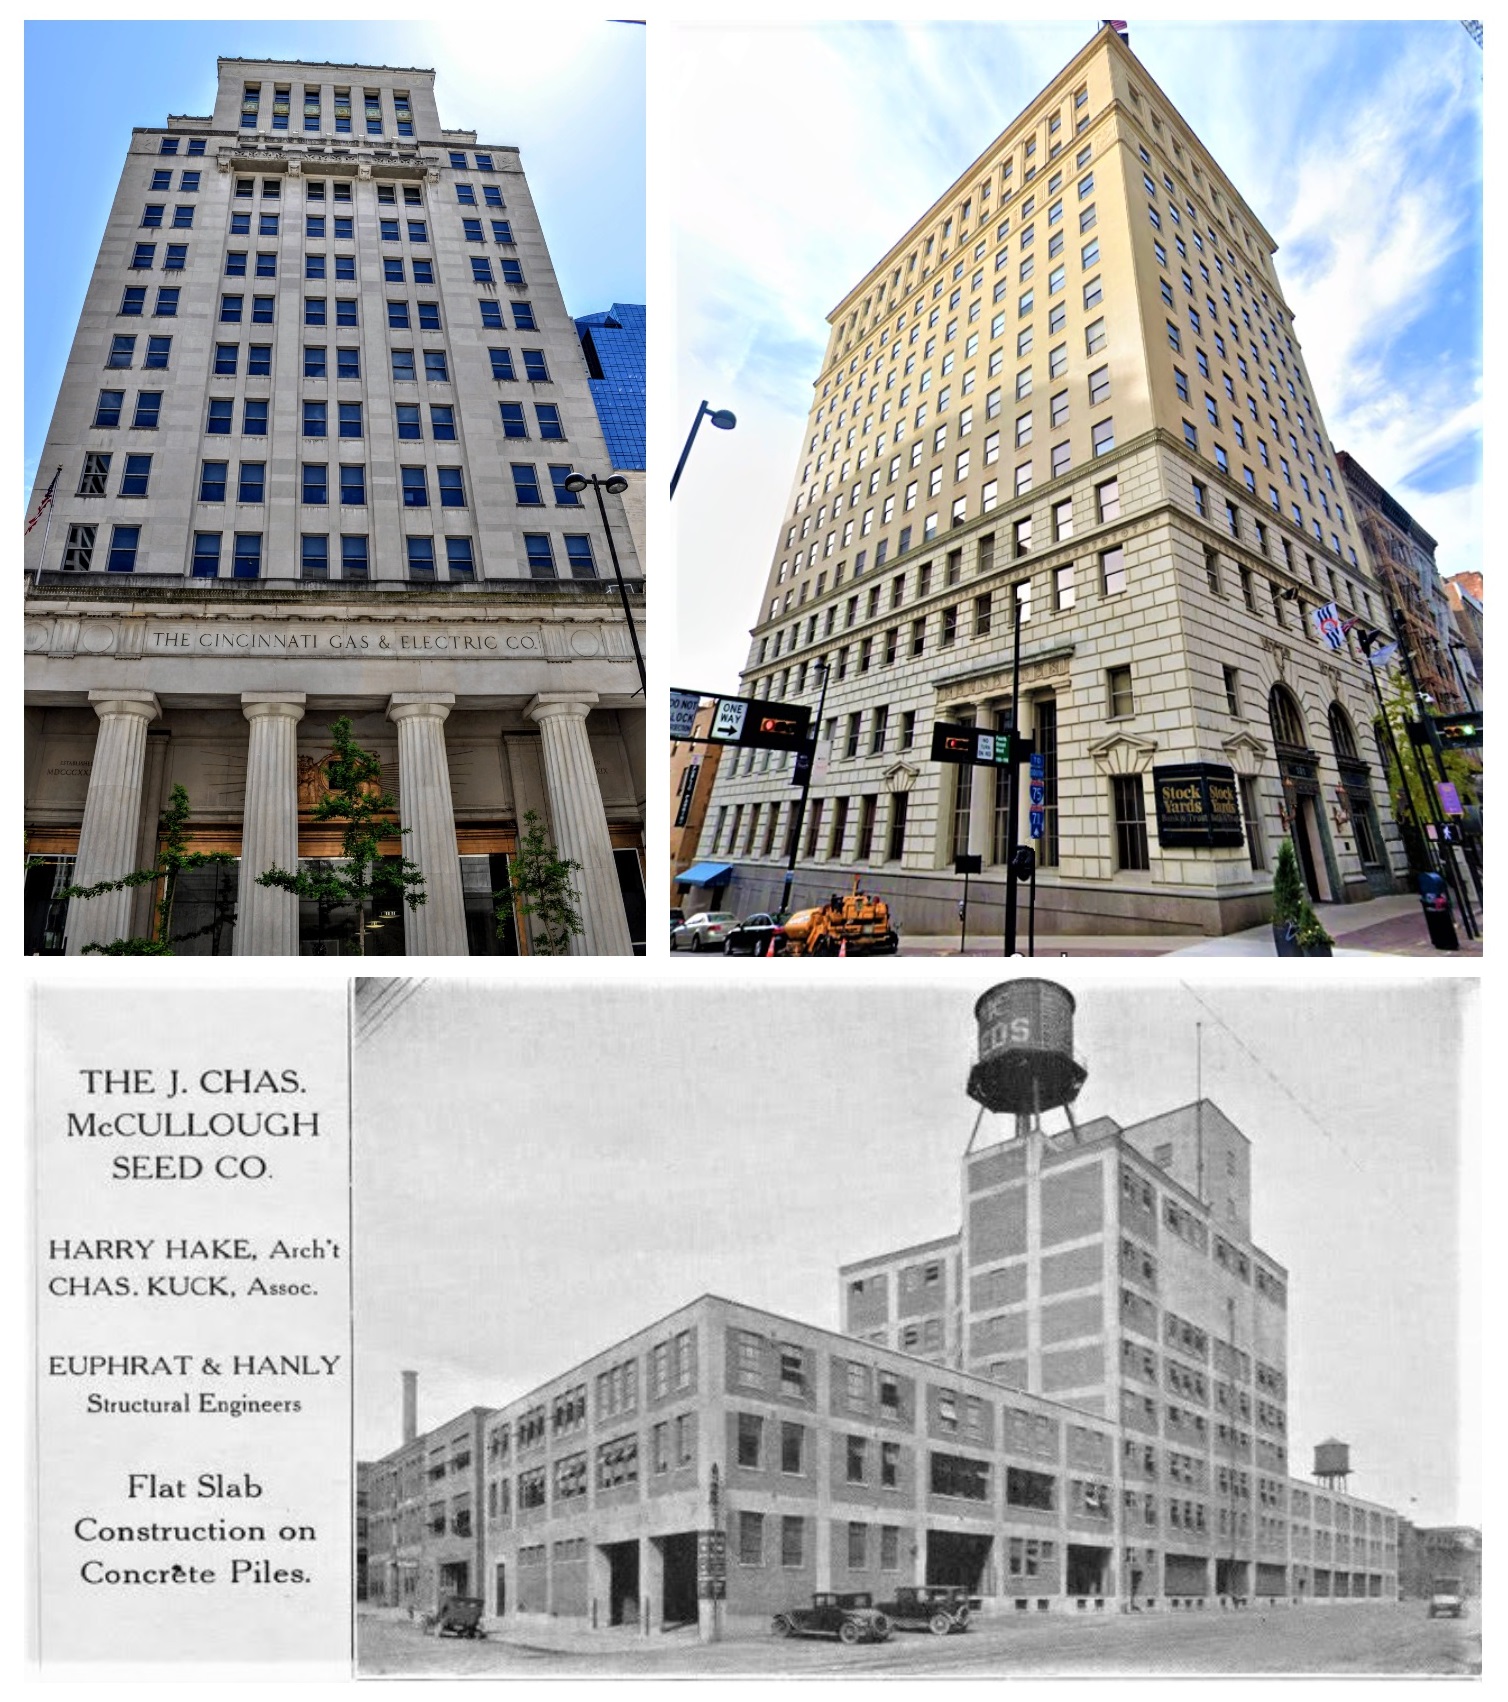 Upper Left: CG&E Building on 4th, Upper Right: Cincinnati Chamber of Commerce, Lower: McCullough Seed